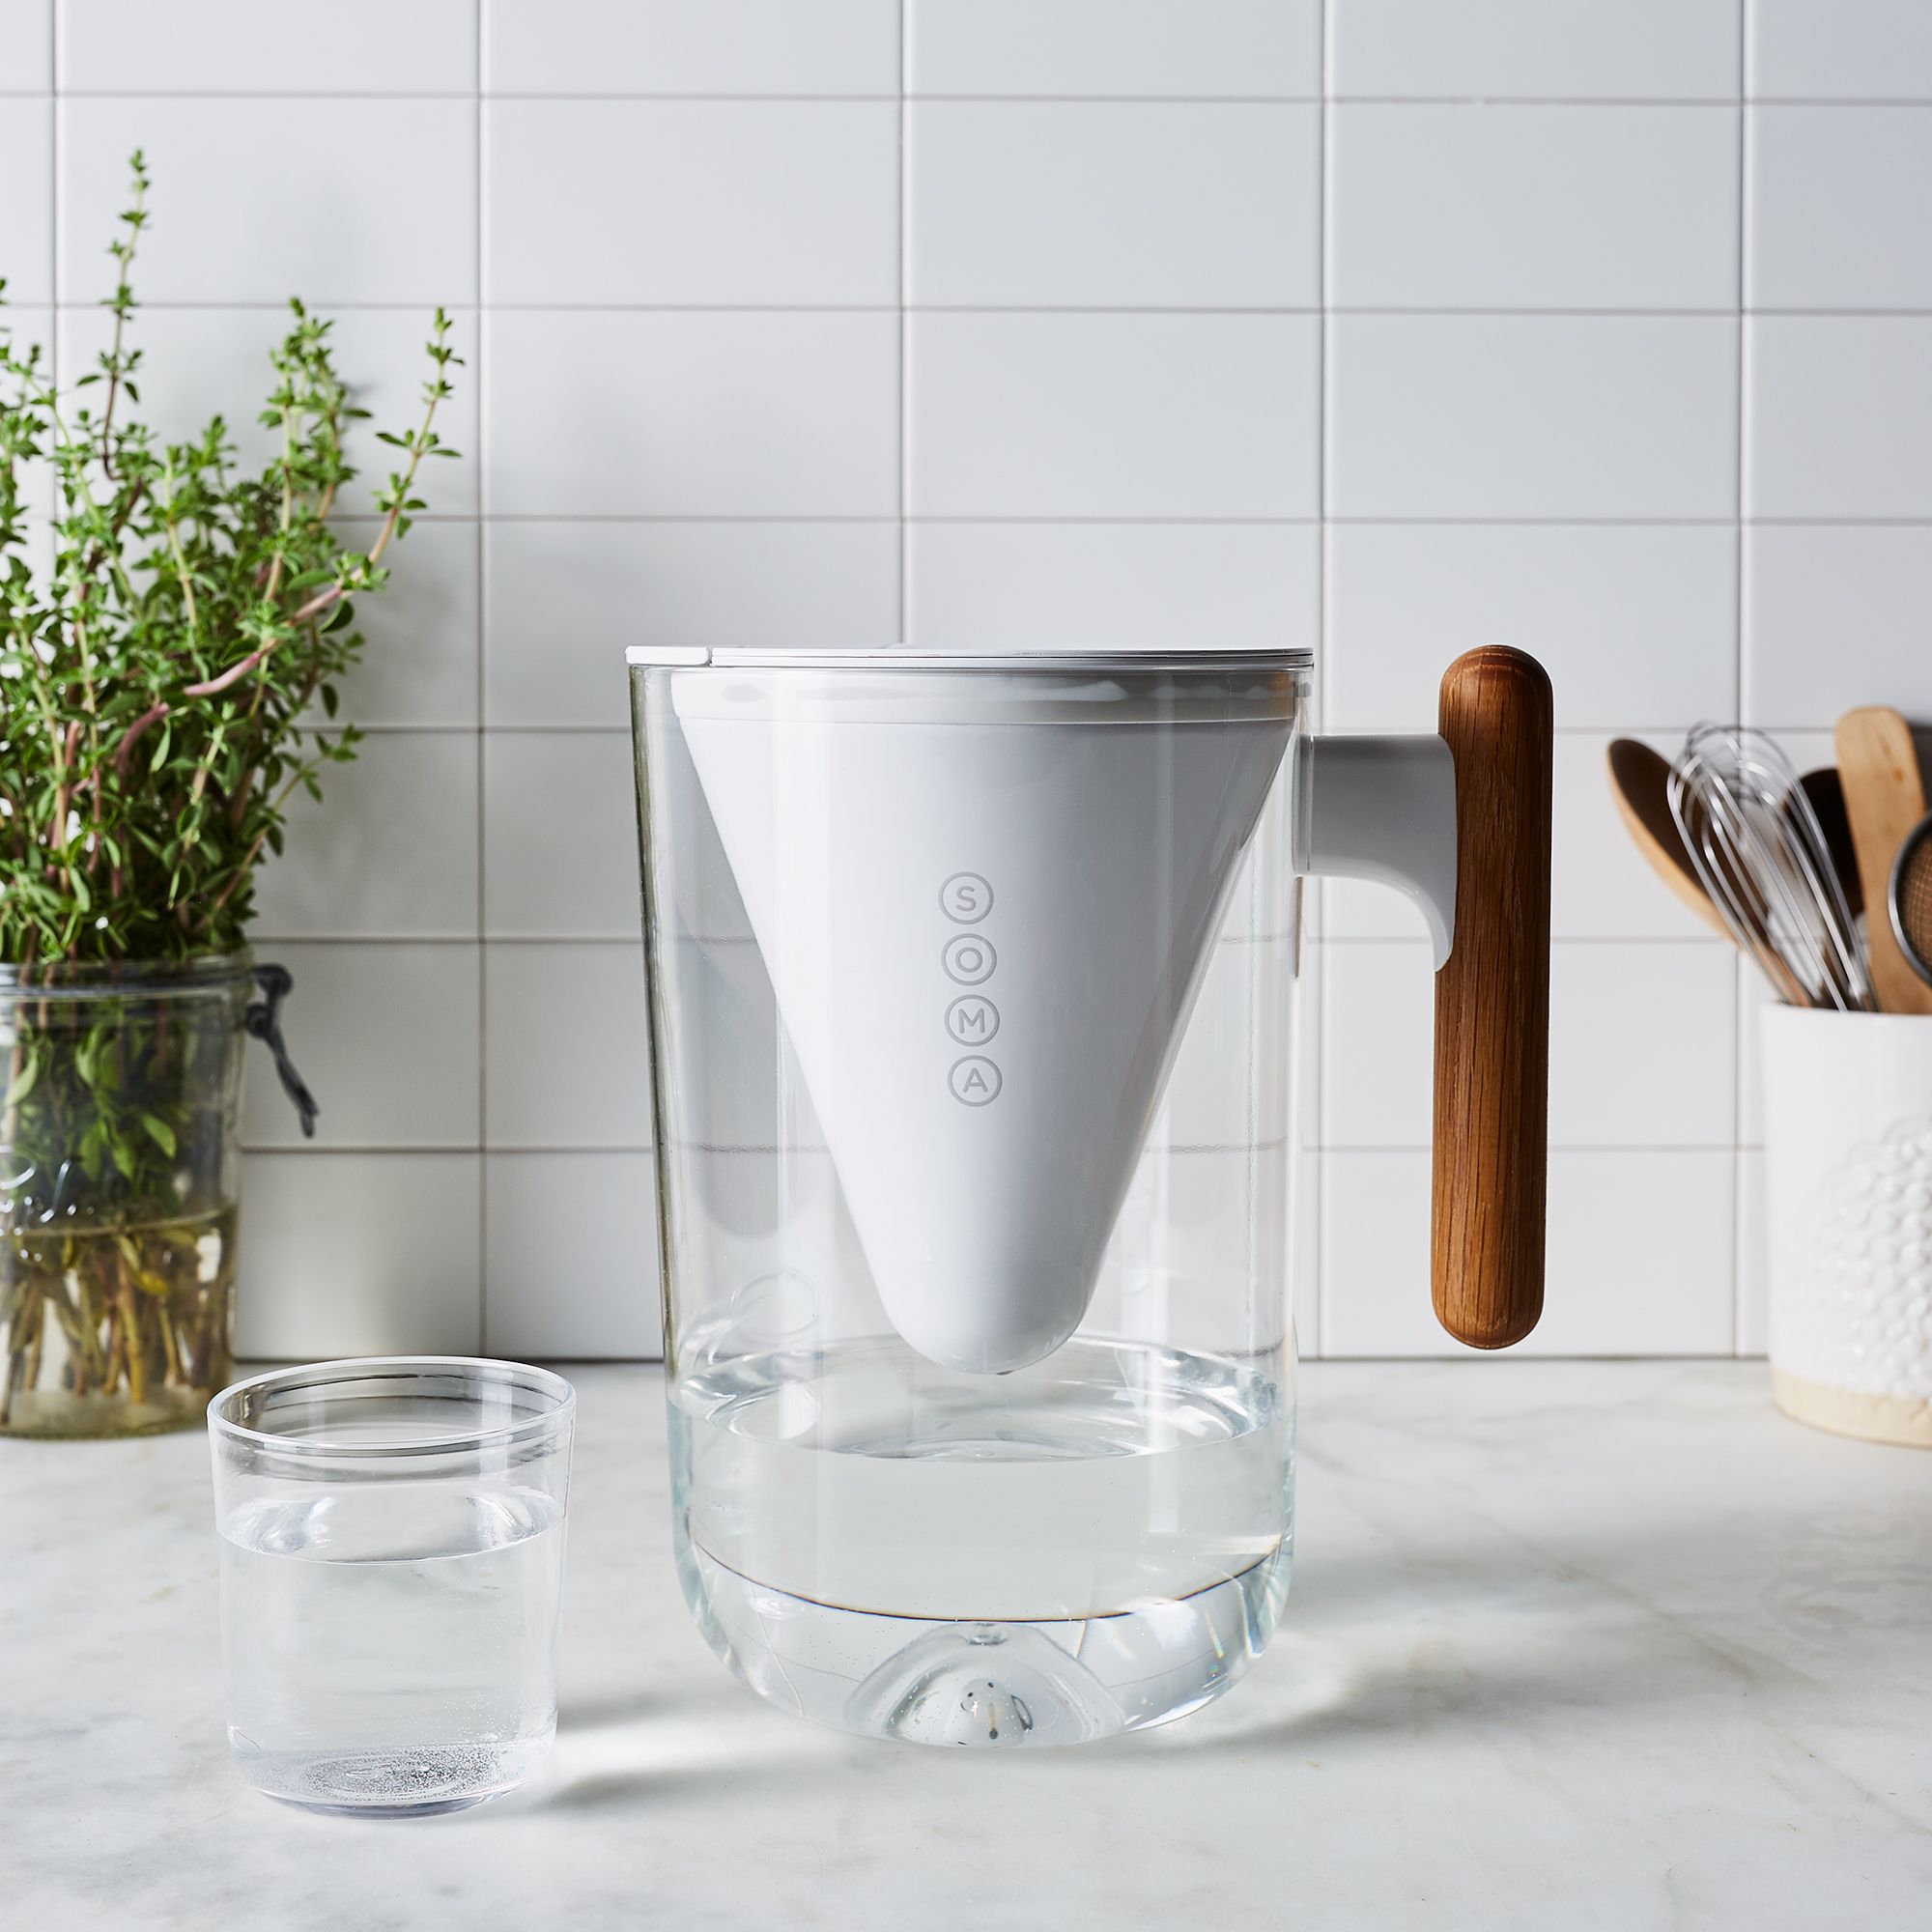 Soma Glass Carafe Water Filter Pitcher Review